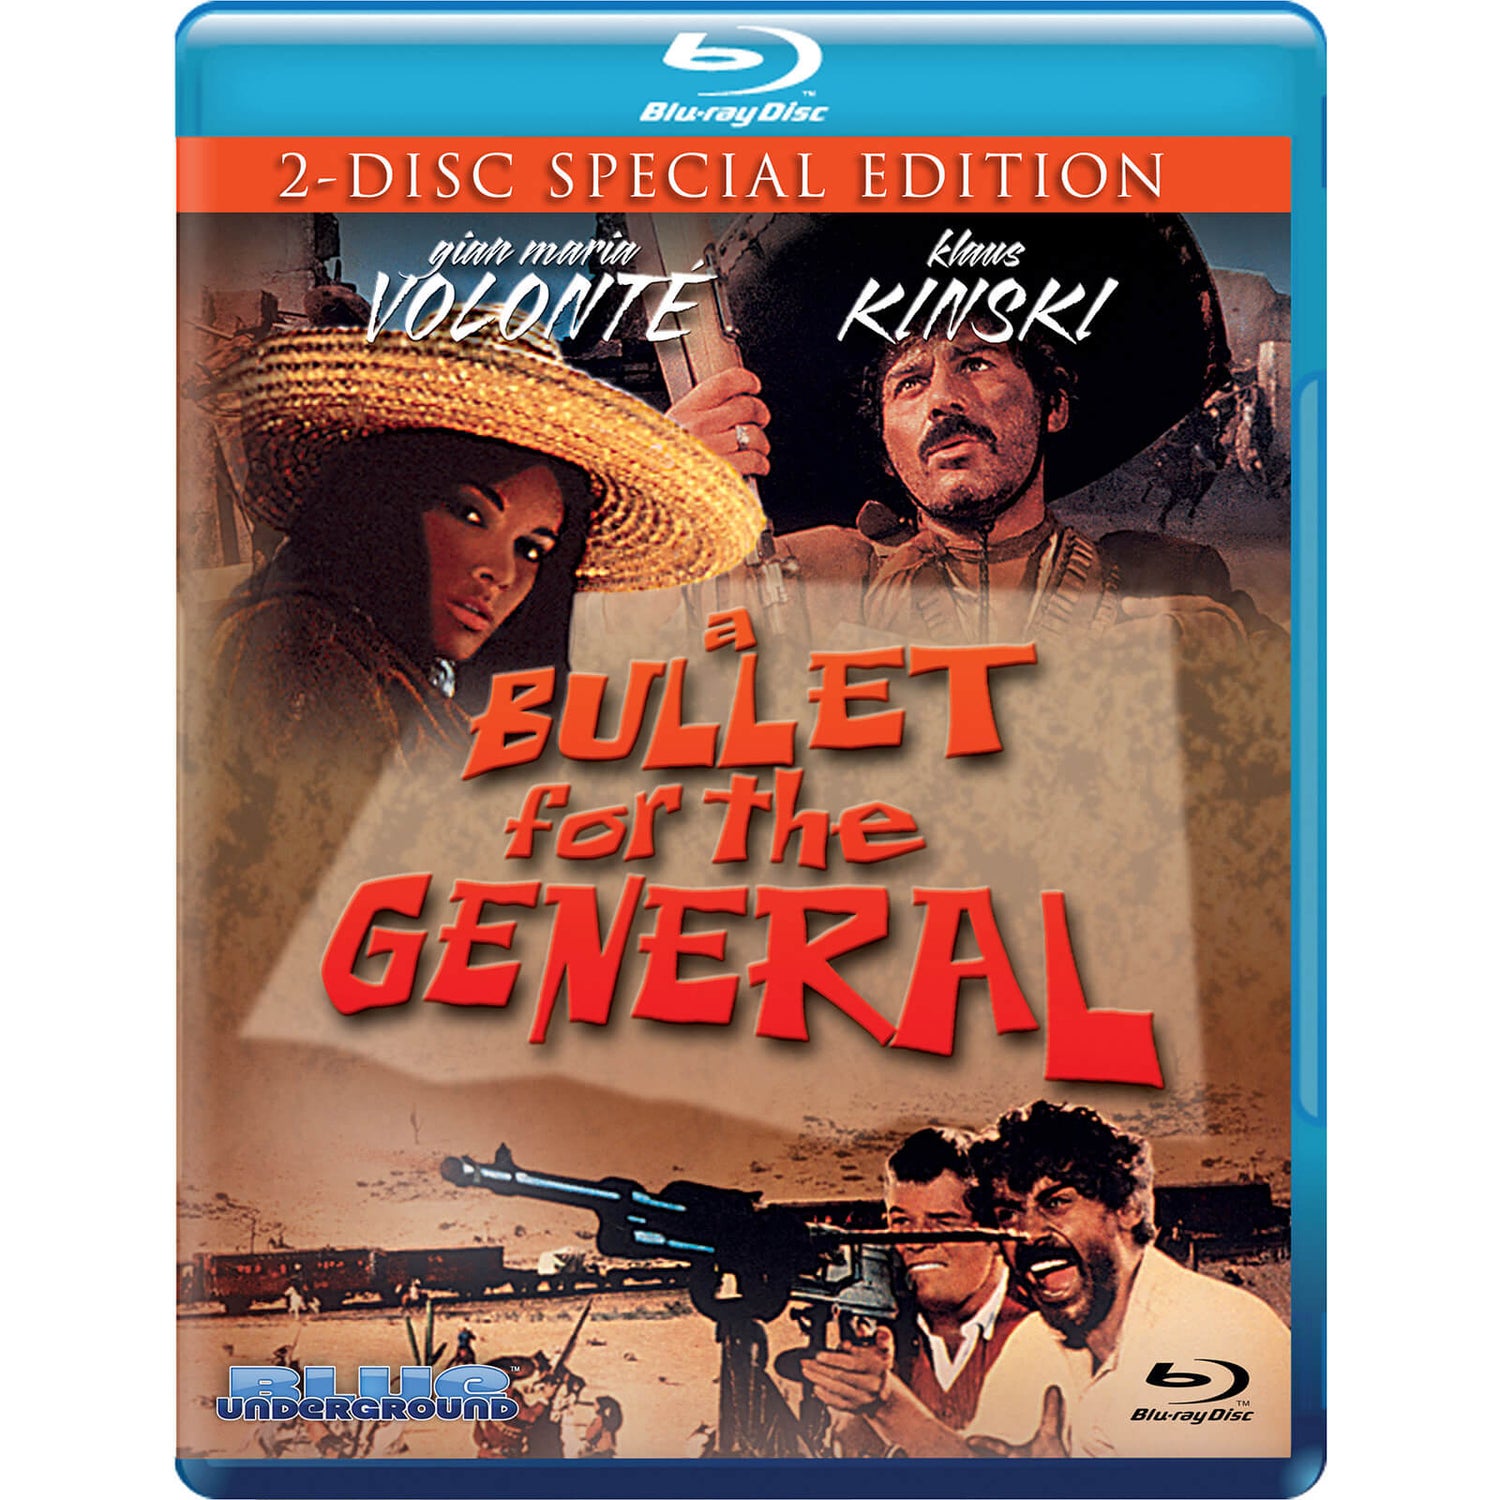 A Bullet For The General: 2-Disc Special Edition